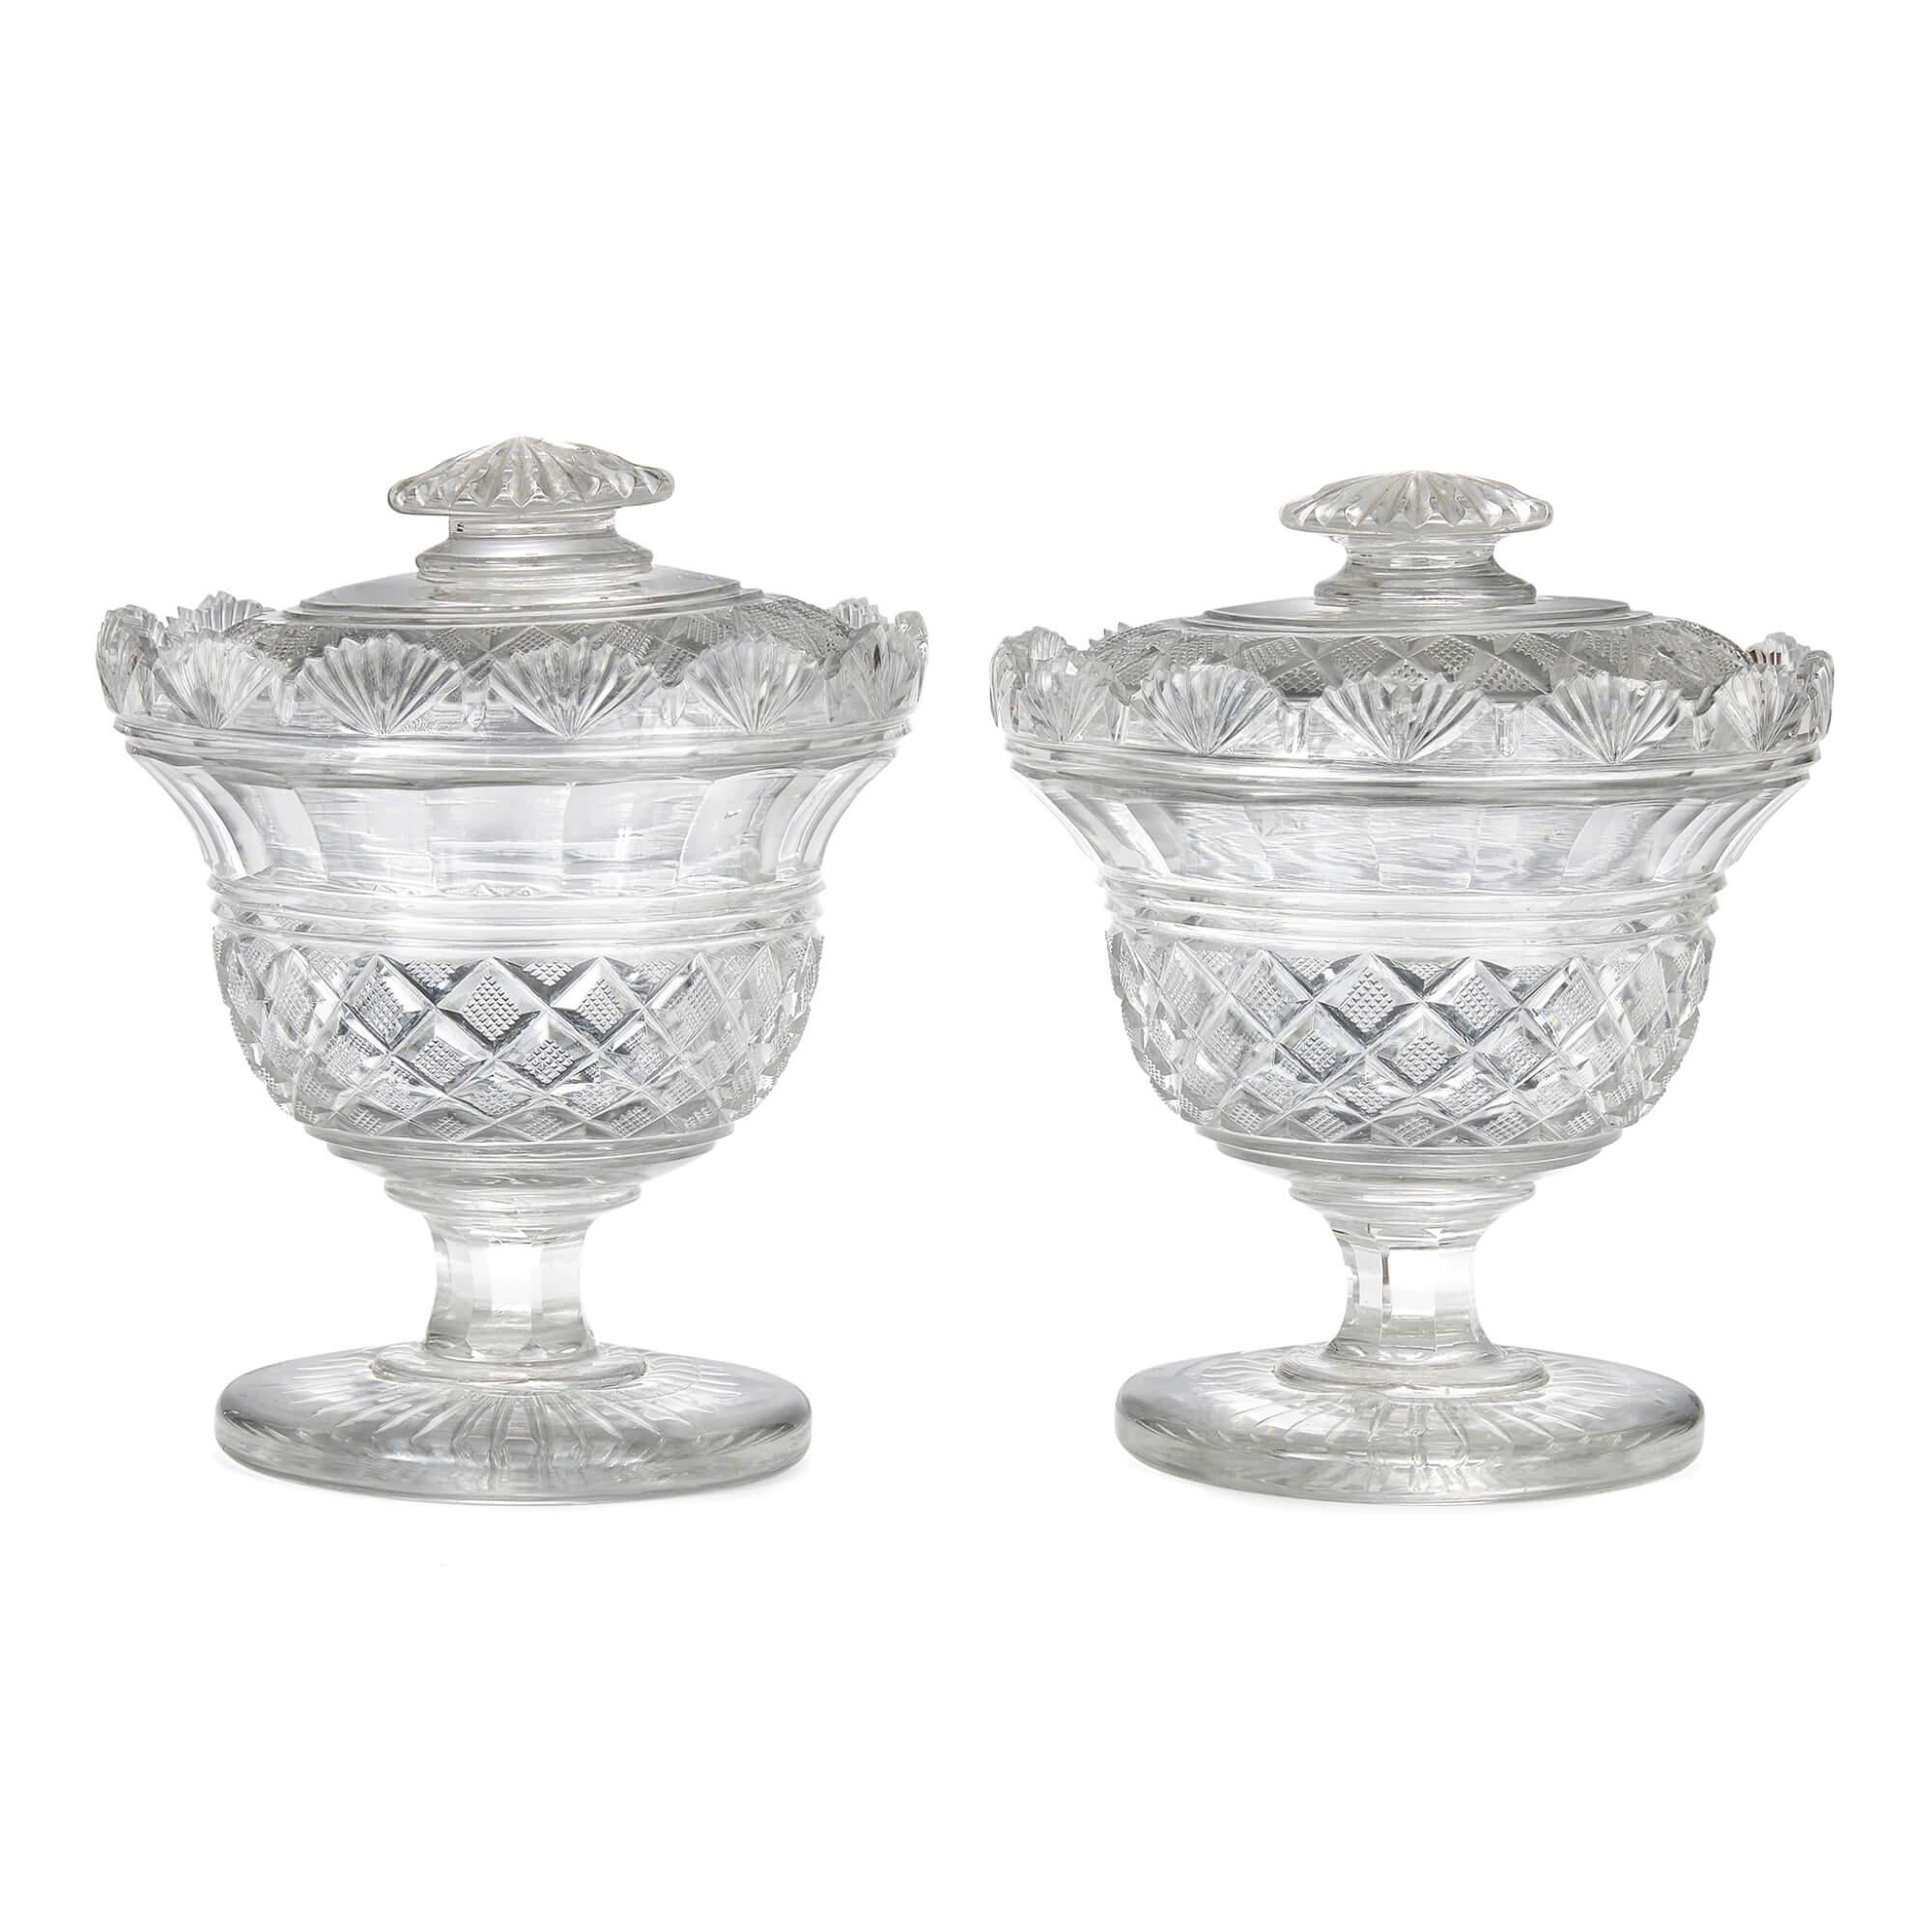 Pair of English engraved and cut glass sweet bowls
English, 20th century
Measures: height 16cm, diameter 12cm

With a quaint, humble and charming character, these near-identical glass bowls were made in England during the twentieth century, and